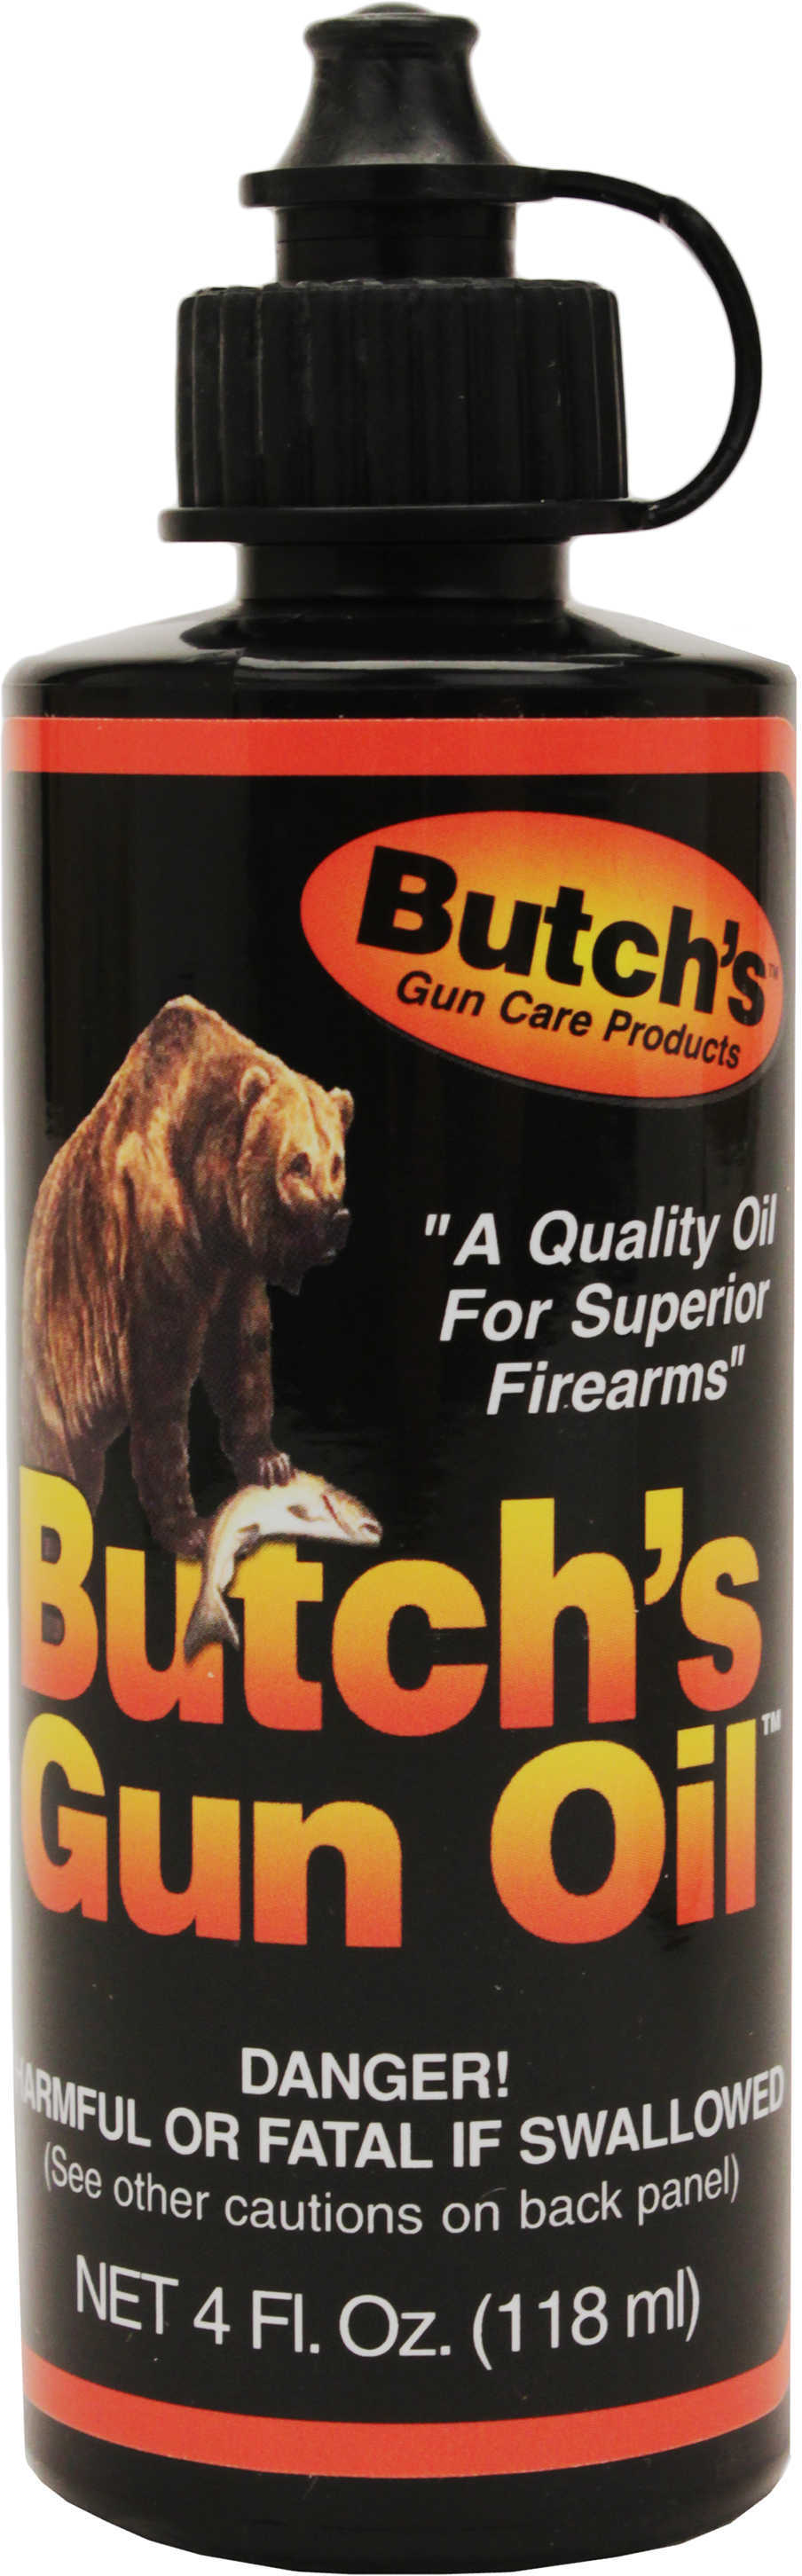 Lyman Butch's Gun Oil - 4 Oz. U.S. Military proven Formula - WithstAnds The intense Heat, Friction And pressures Produce